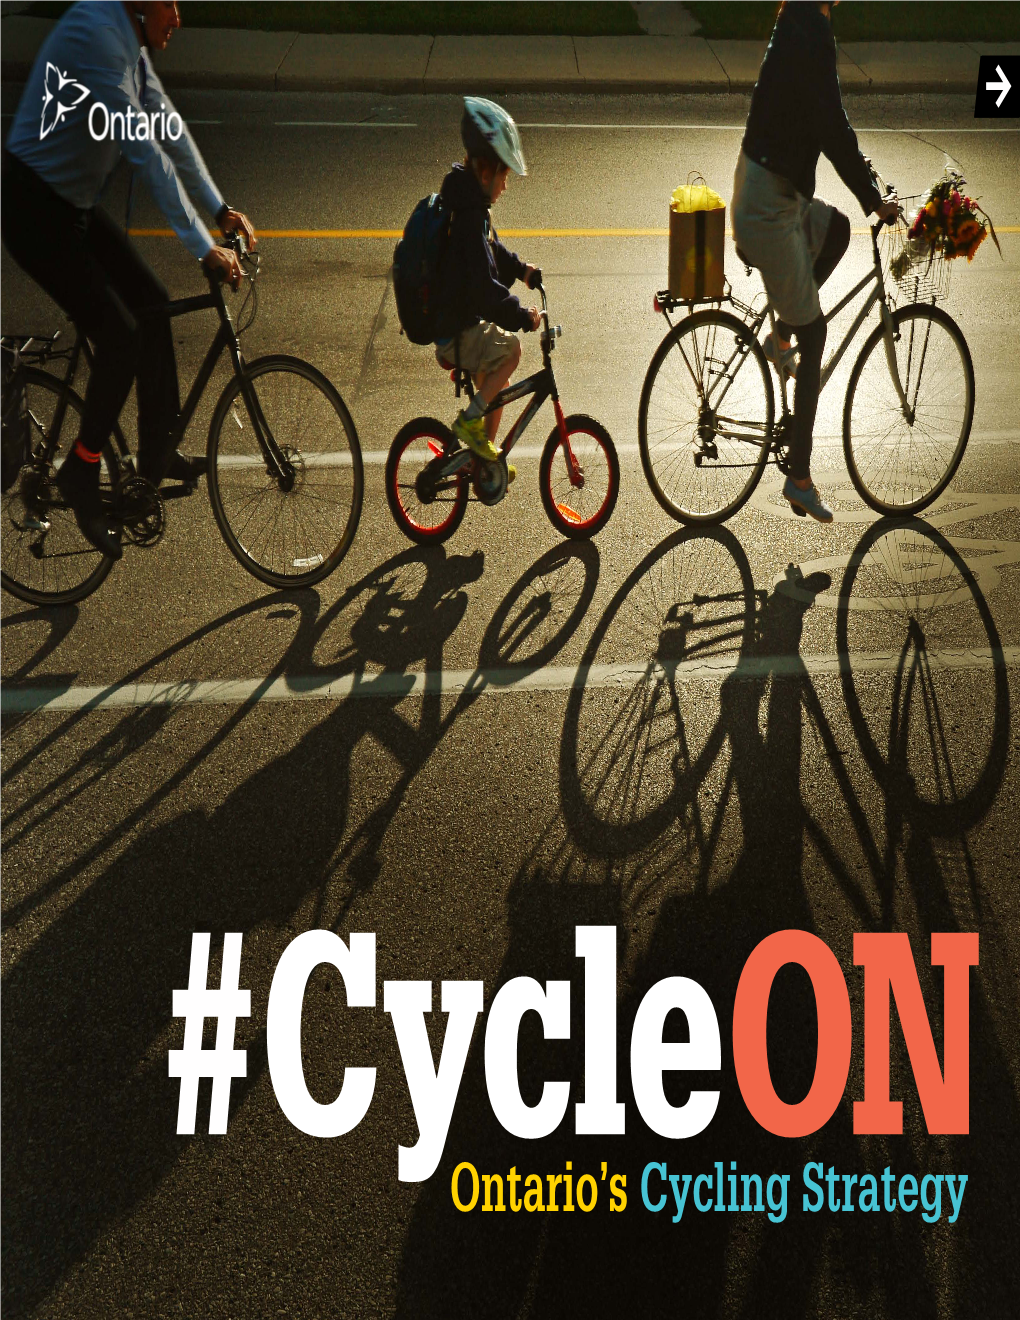 Cycleon Ontario's Cycling Strategy